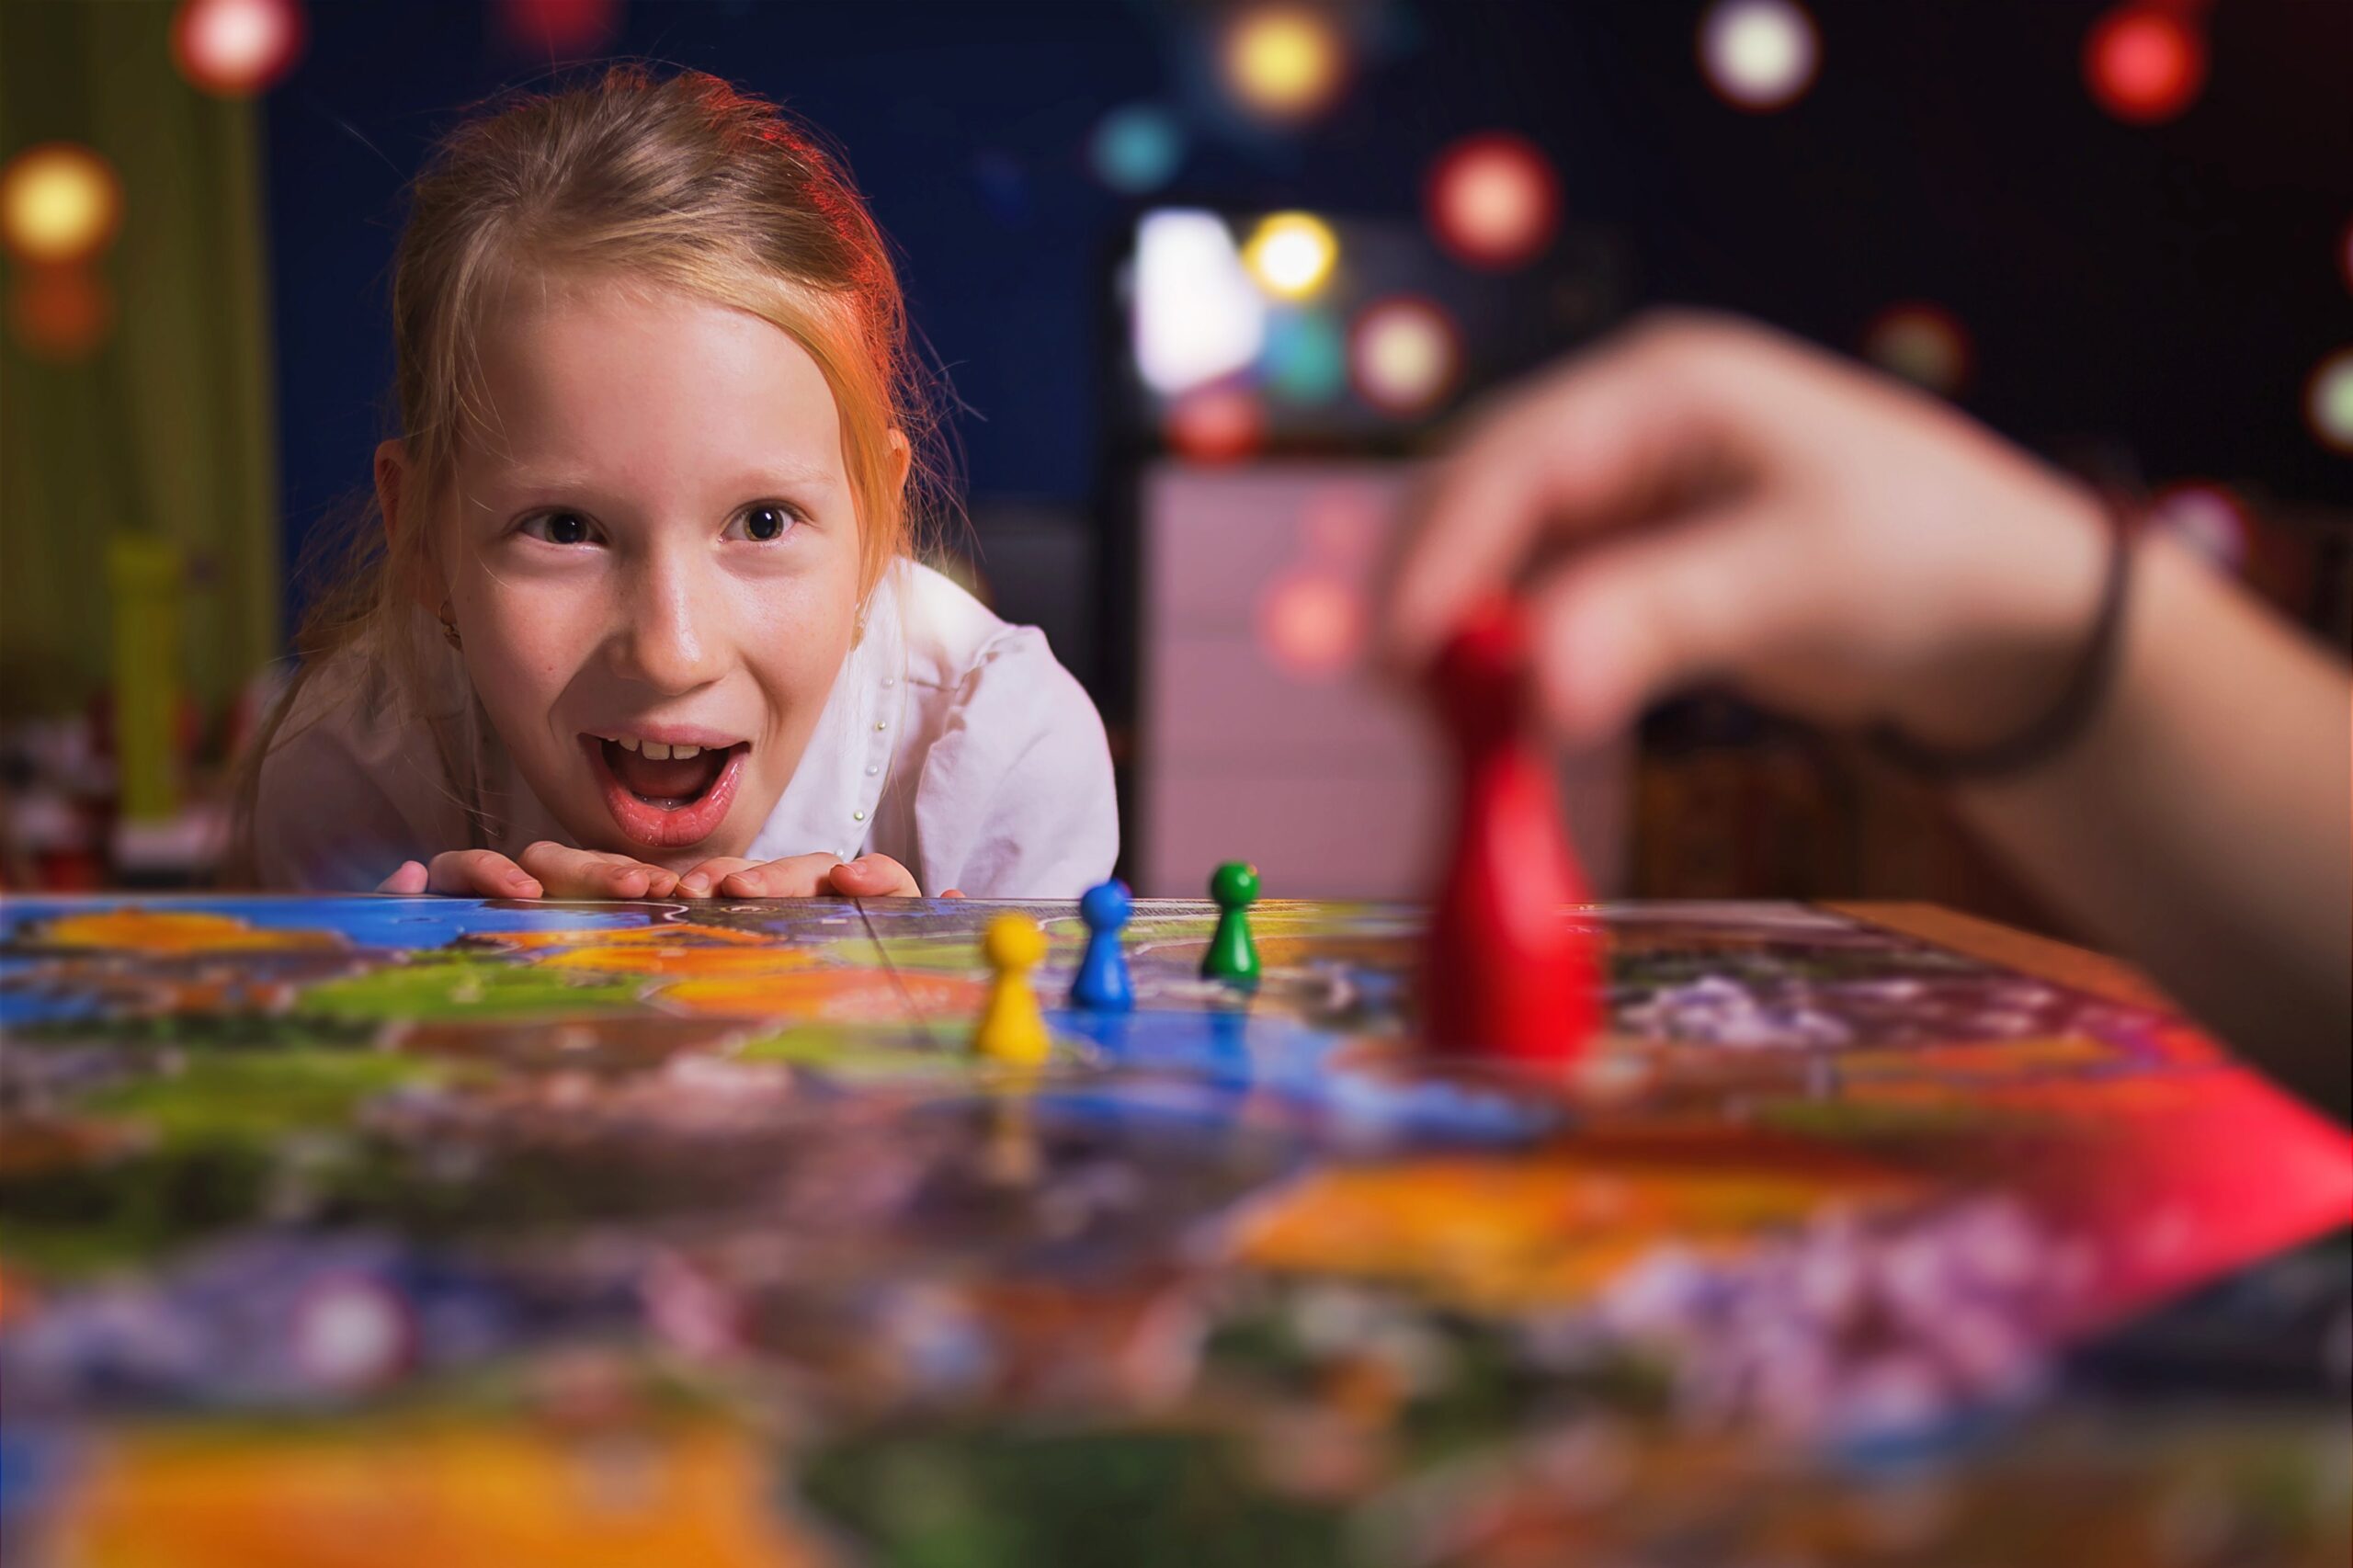 A young girl gets excited as another person moves their game piece onto a board.